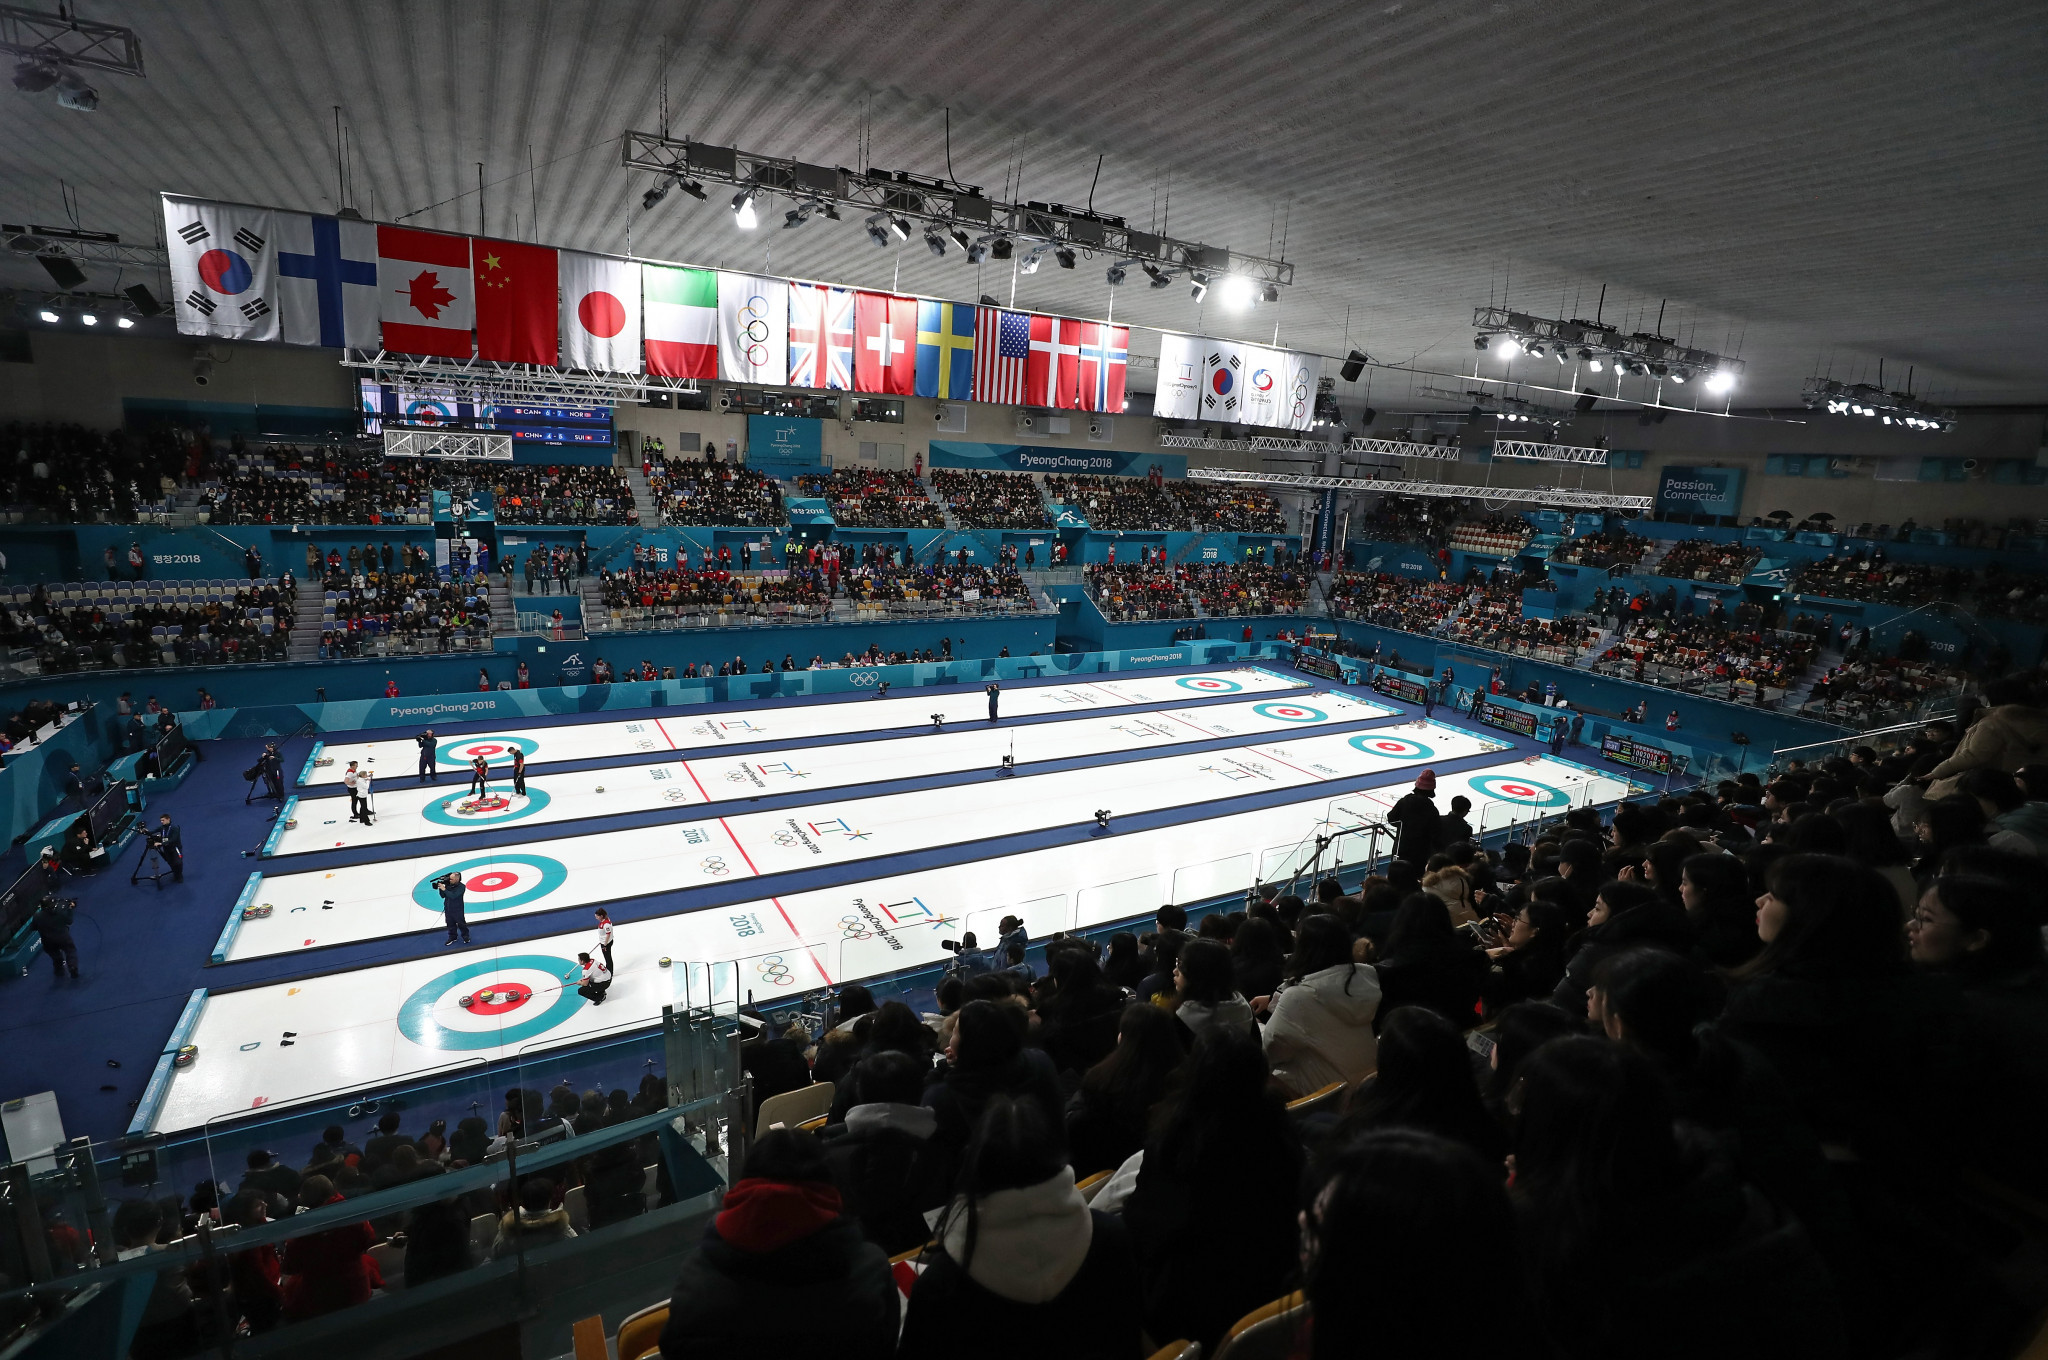 Curling events at Gangwon 2024 are due to be held at Pyeongchang 2018 venue the Gangneung Curling Centre ©Getty Images